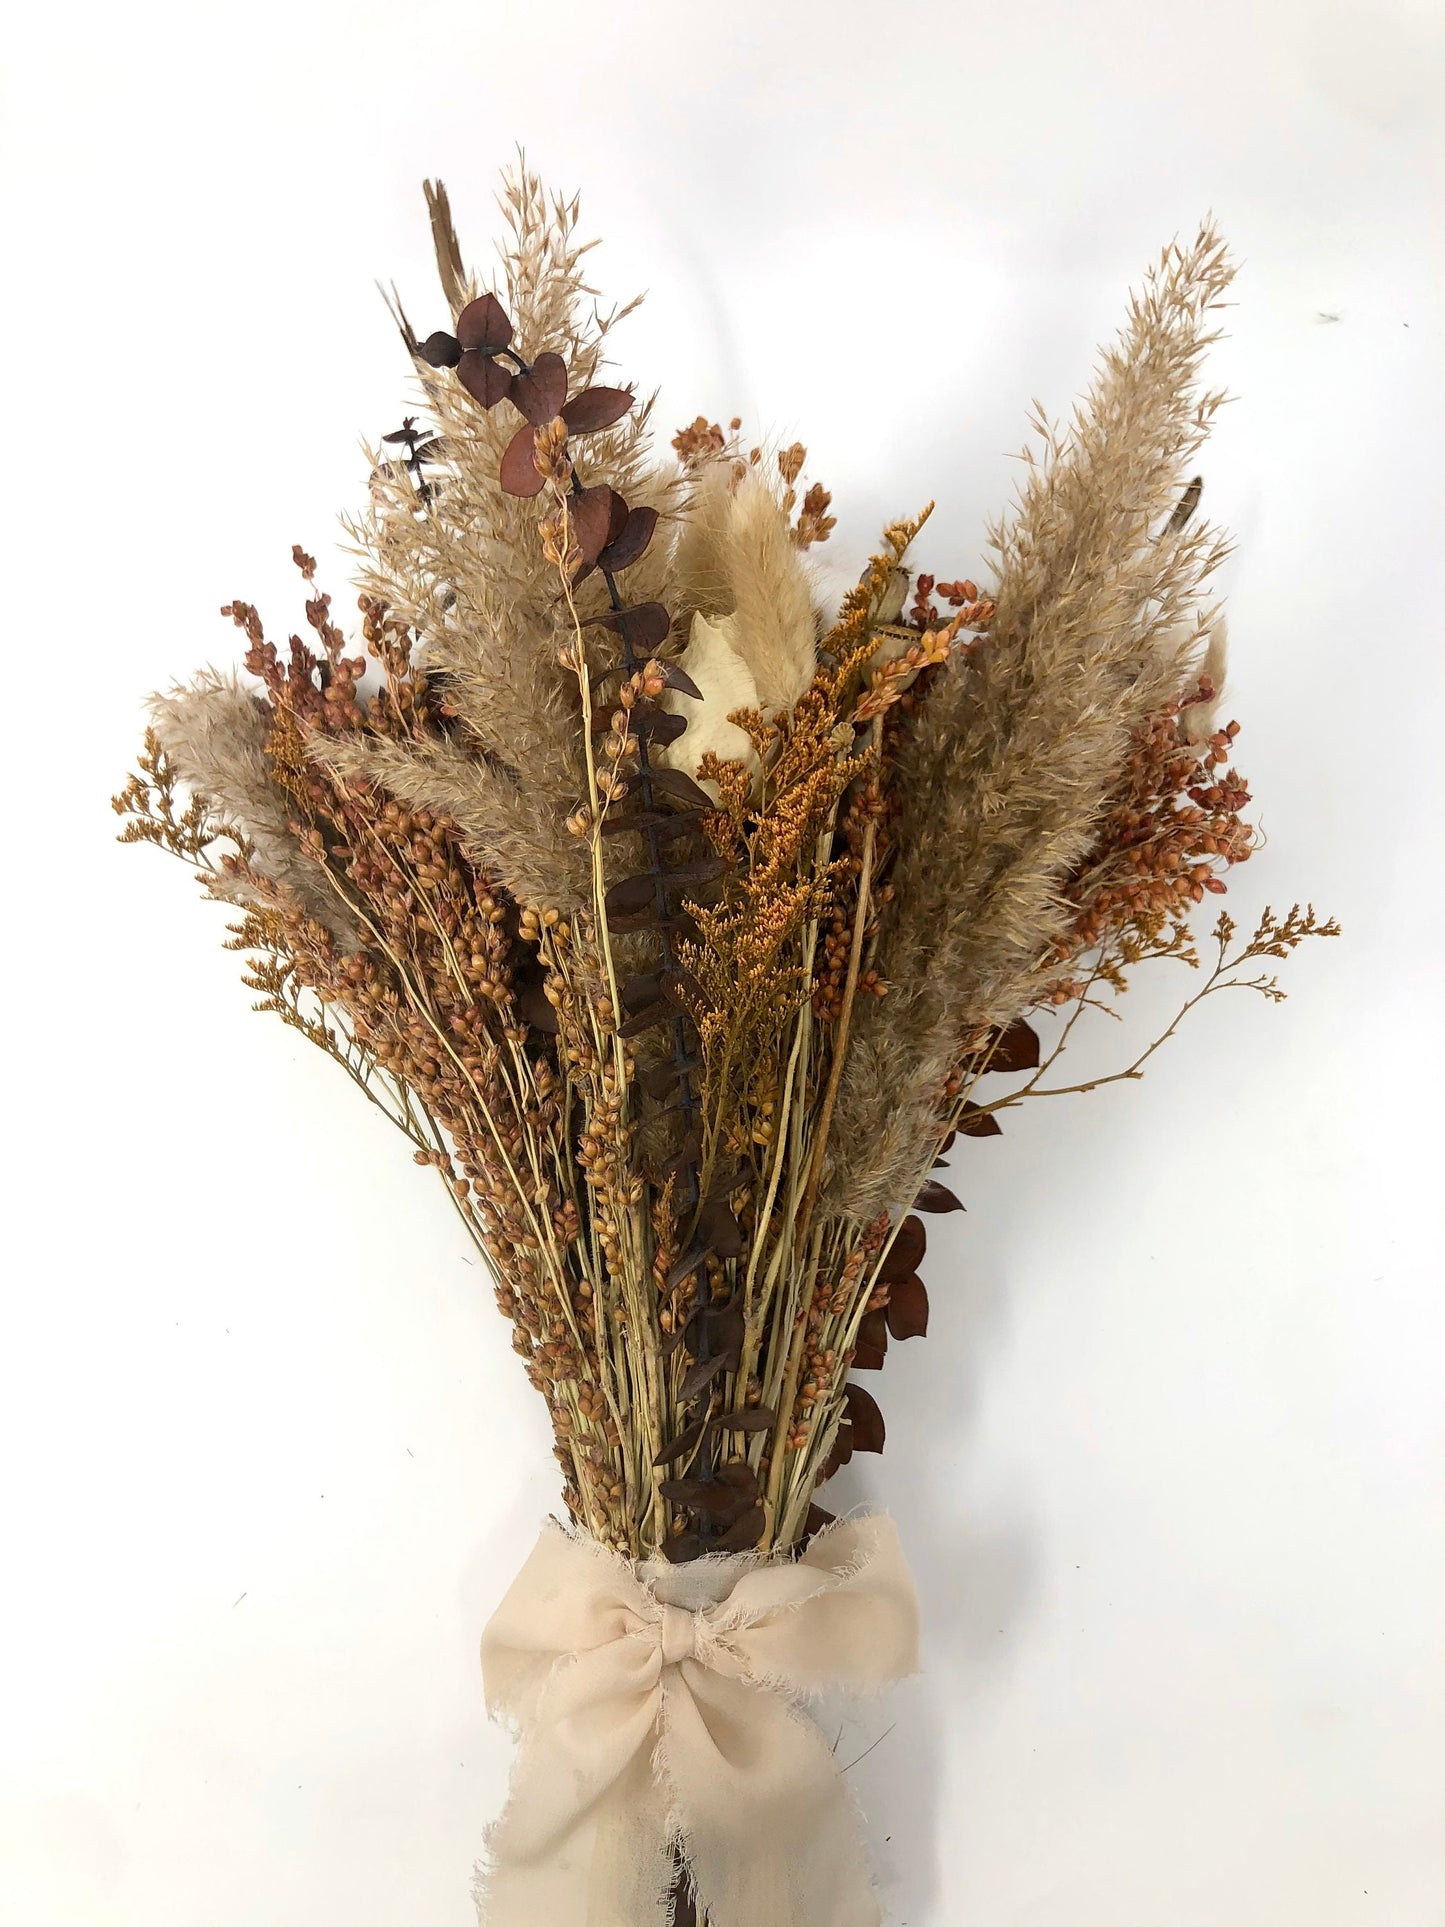 Orange Bouquet, Fall Bouquet, Dried, Preserved Flowers, House Decoration, Dried Roses, Pampas, Bunny Tail, Feathers, Eucalyptus